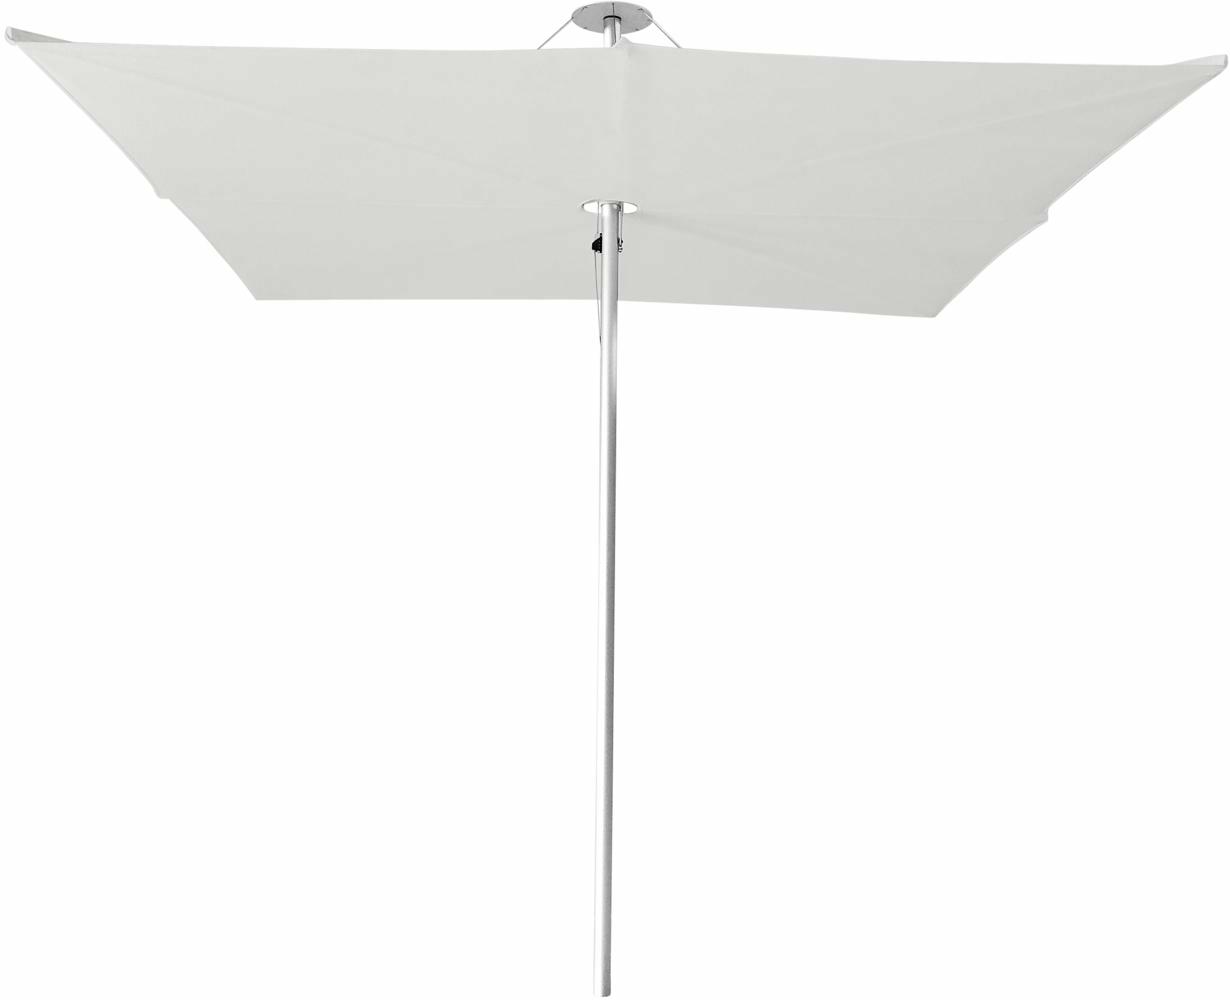 Infina canopy square 3 m in colour Canvas